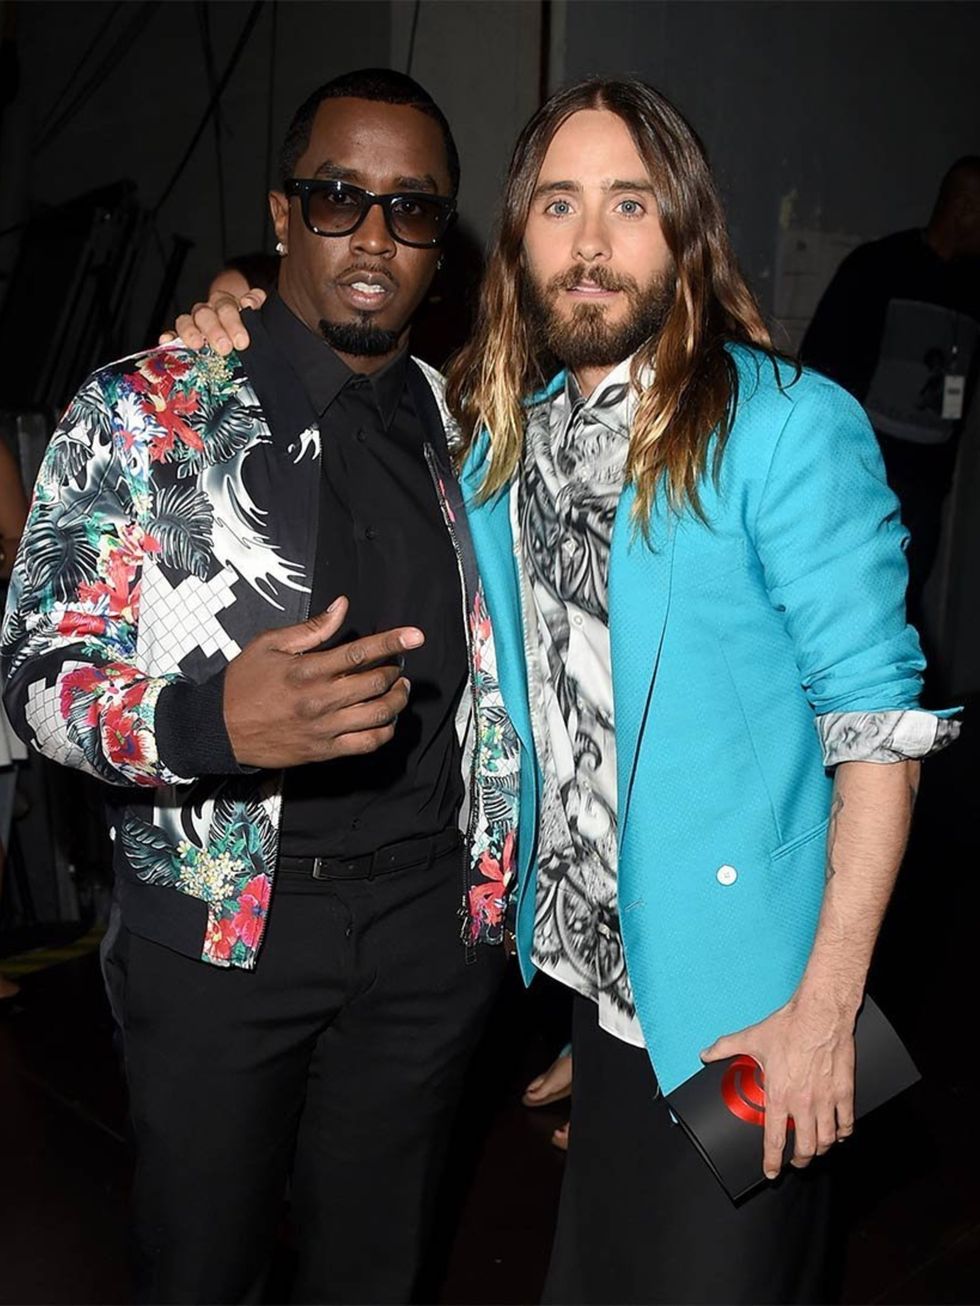 <p>P. Diddy and Jared Leto at the 2014 iHeartRadio Music Awards held at The Shrine Auditorium, LA.</p>